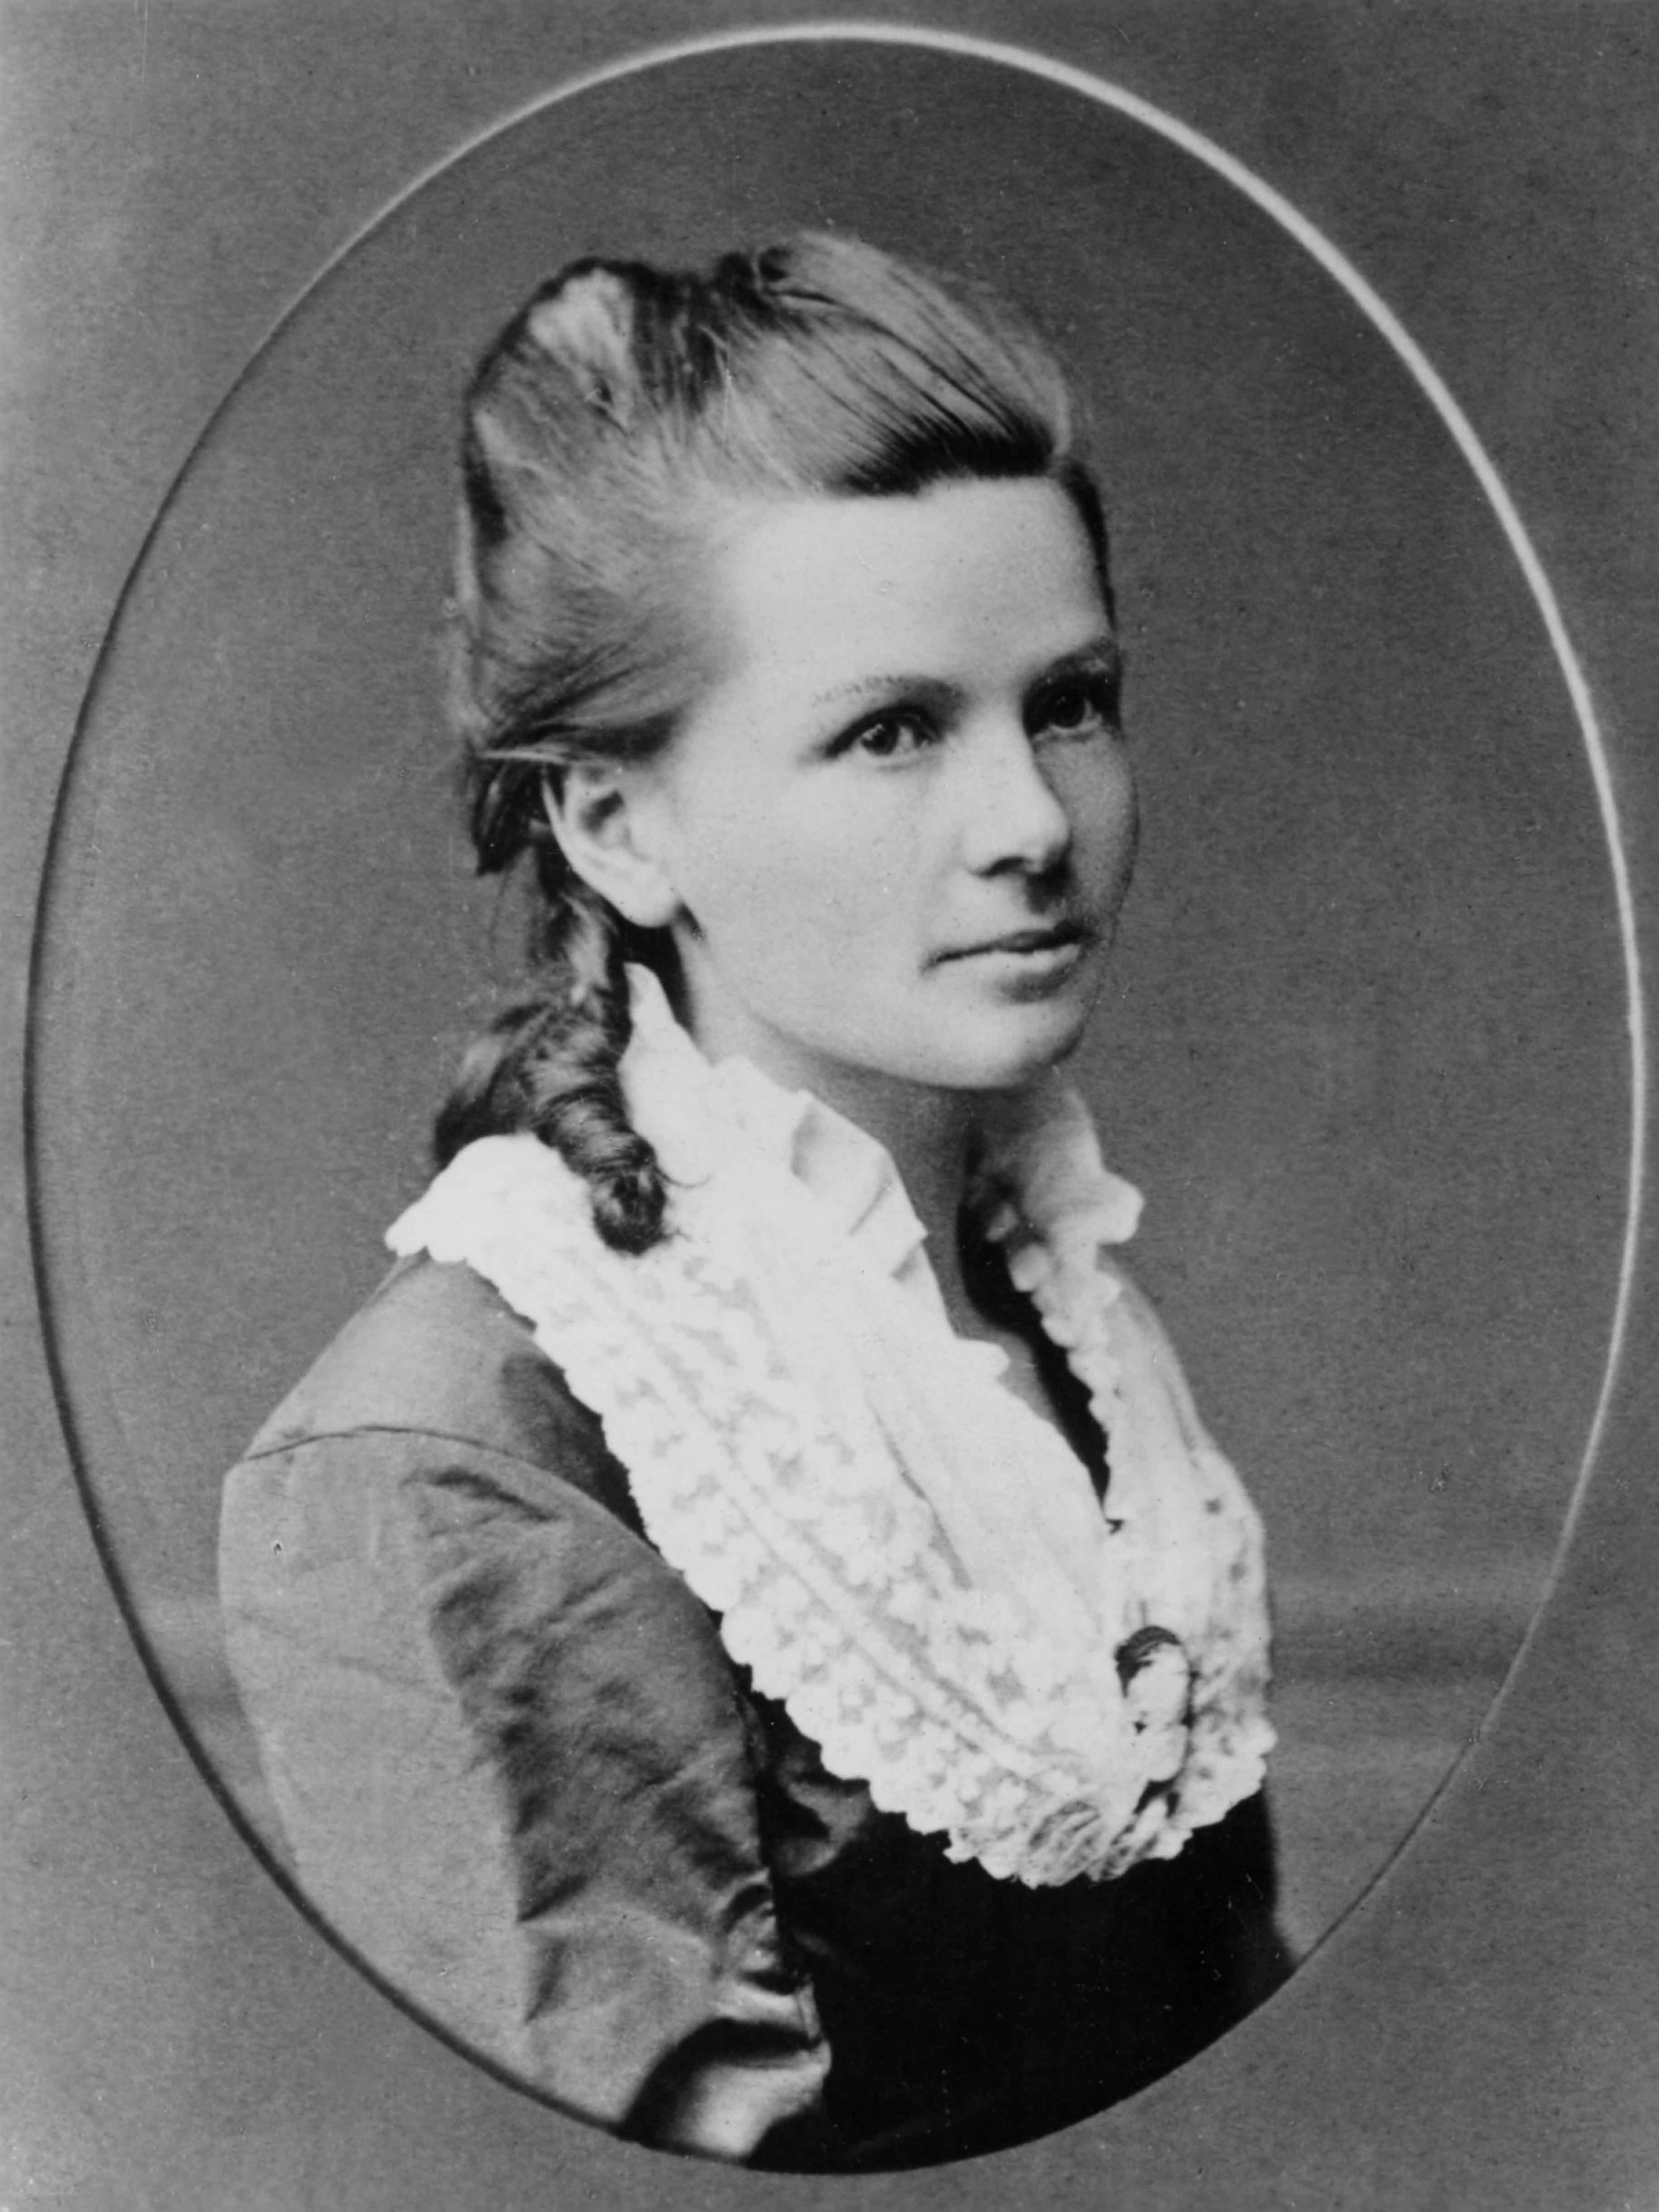 Allegedly, the very first long-distance outing in a horseless carriage was undertaken by Bertha Benz.